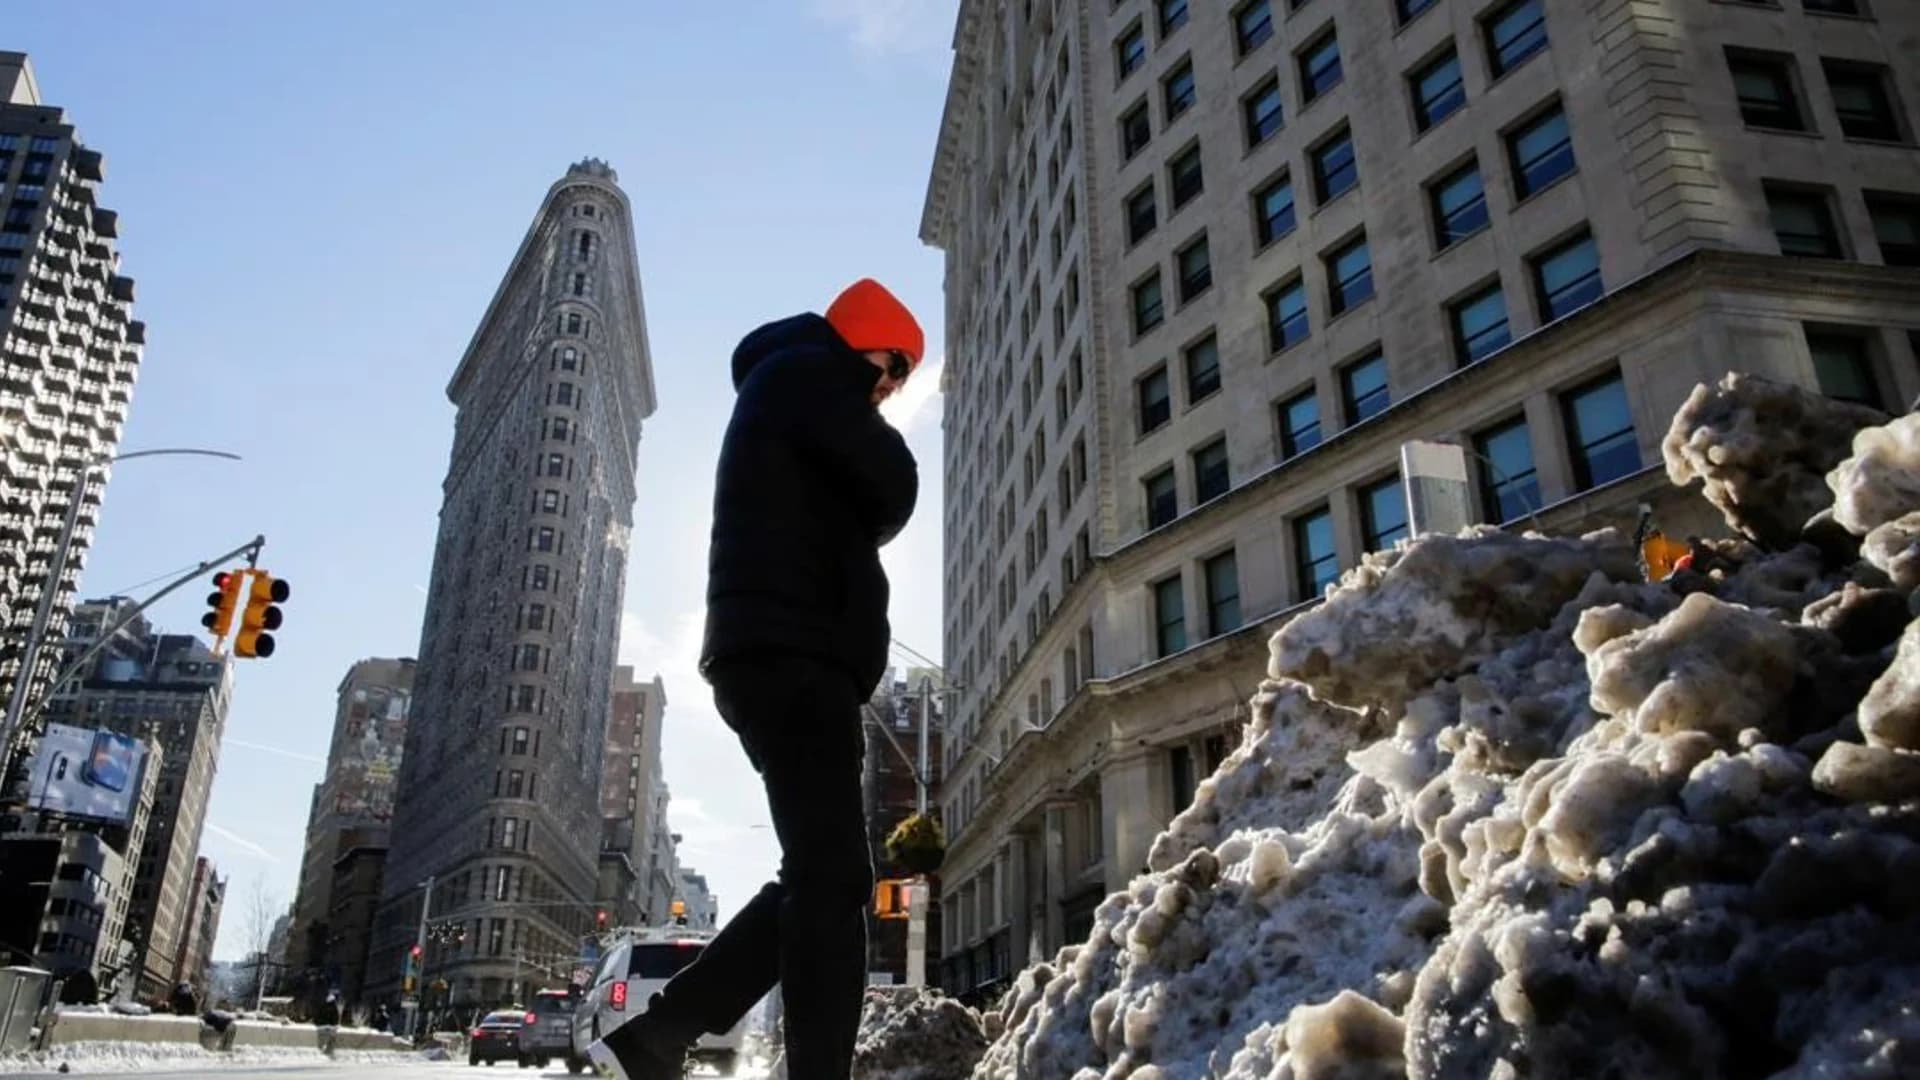 Poll: Do you prefer a cold snap or heat wave?